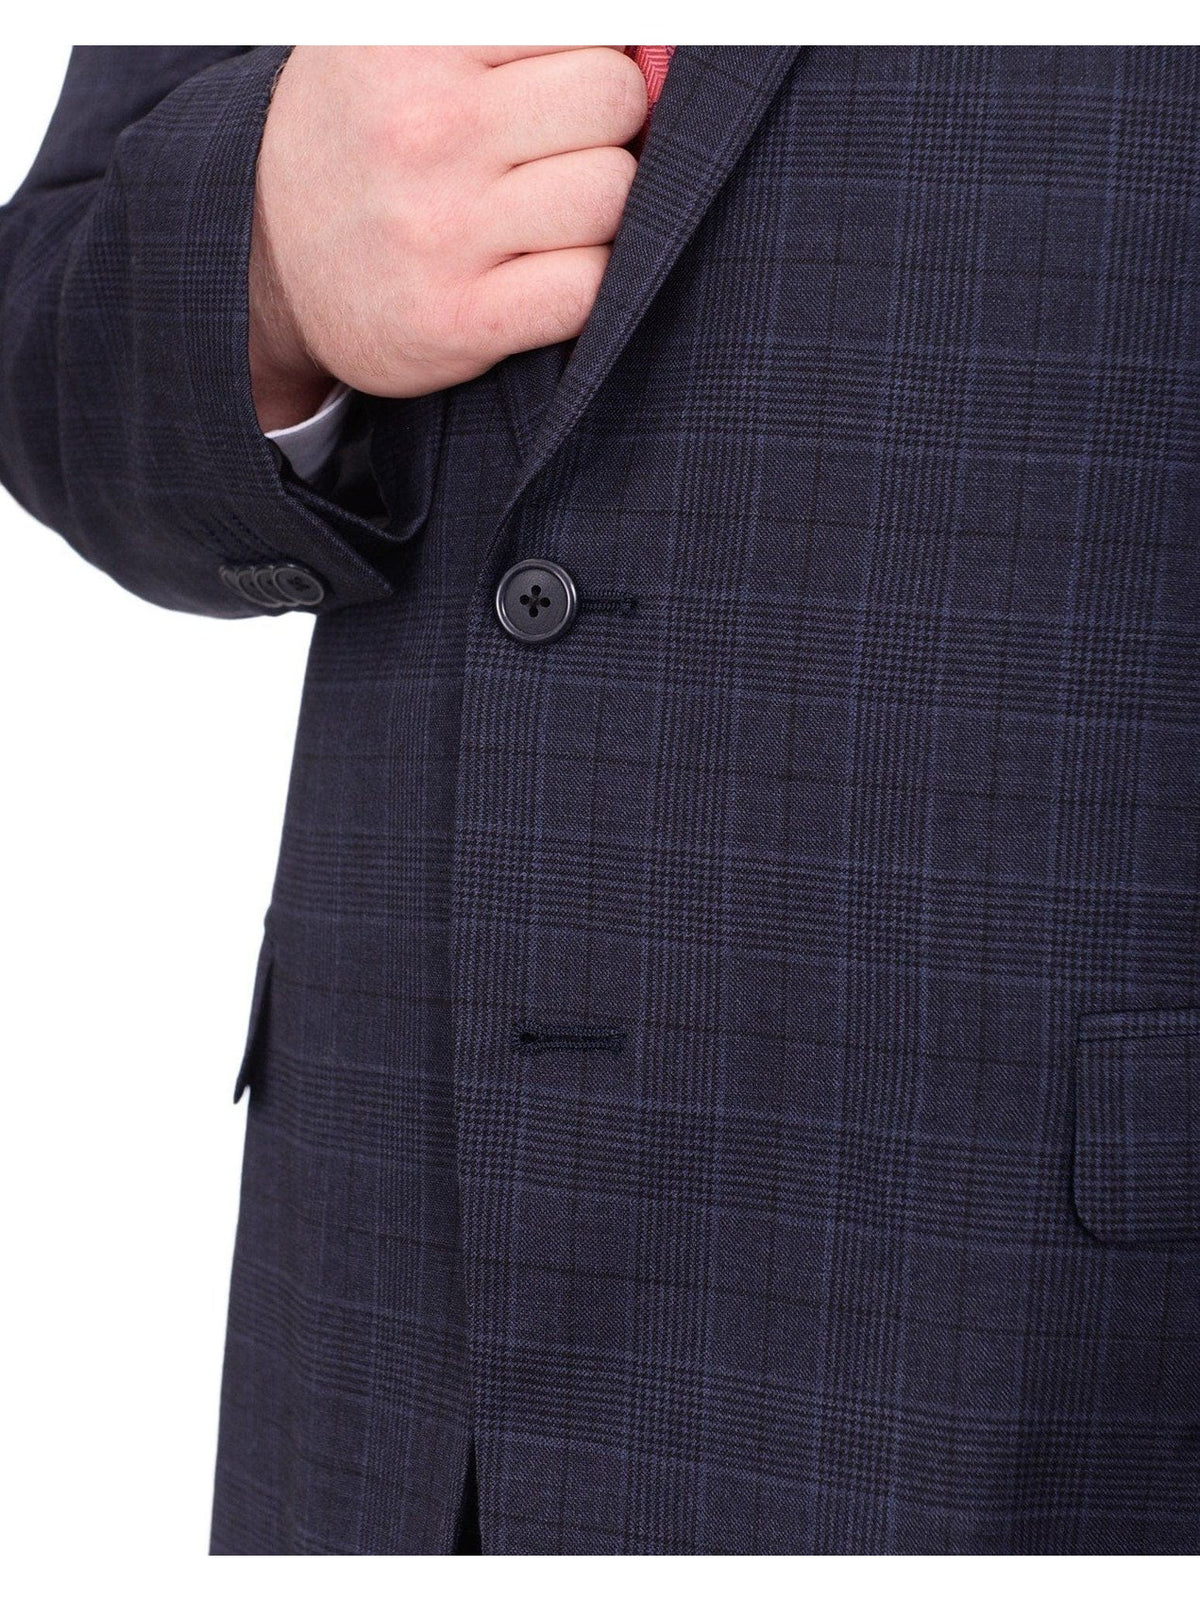 Lazetti Couture Sale Suits Lazetti Couture Portly Fit Slate Blue Glen Plaid Two Button Wool Suit